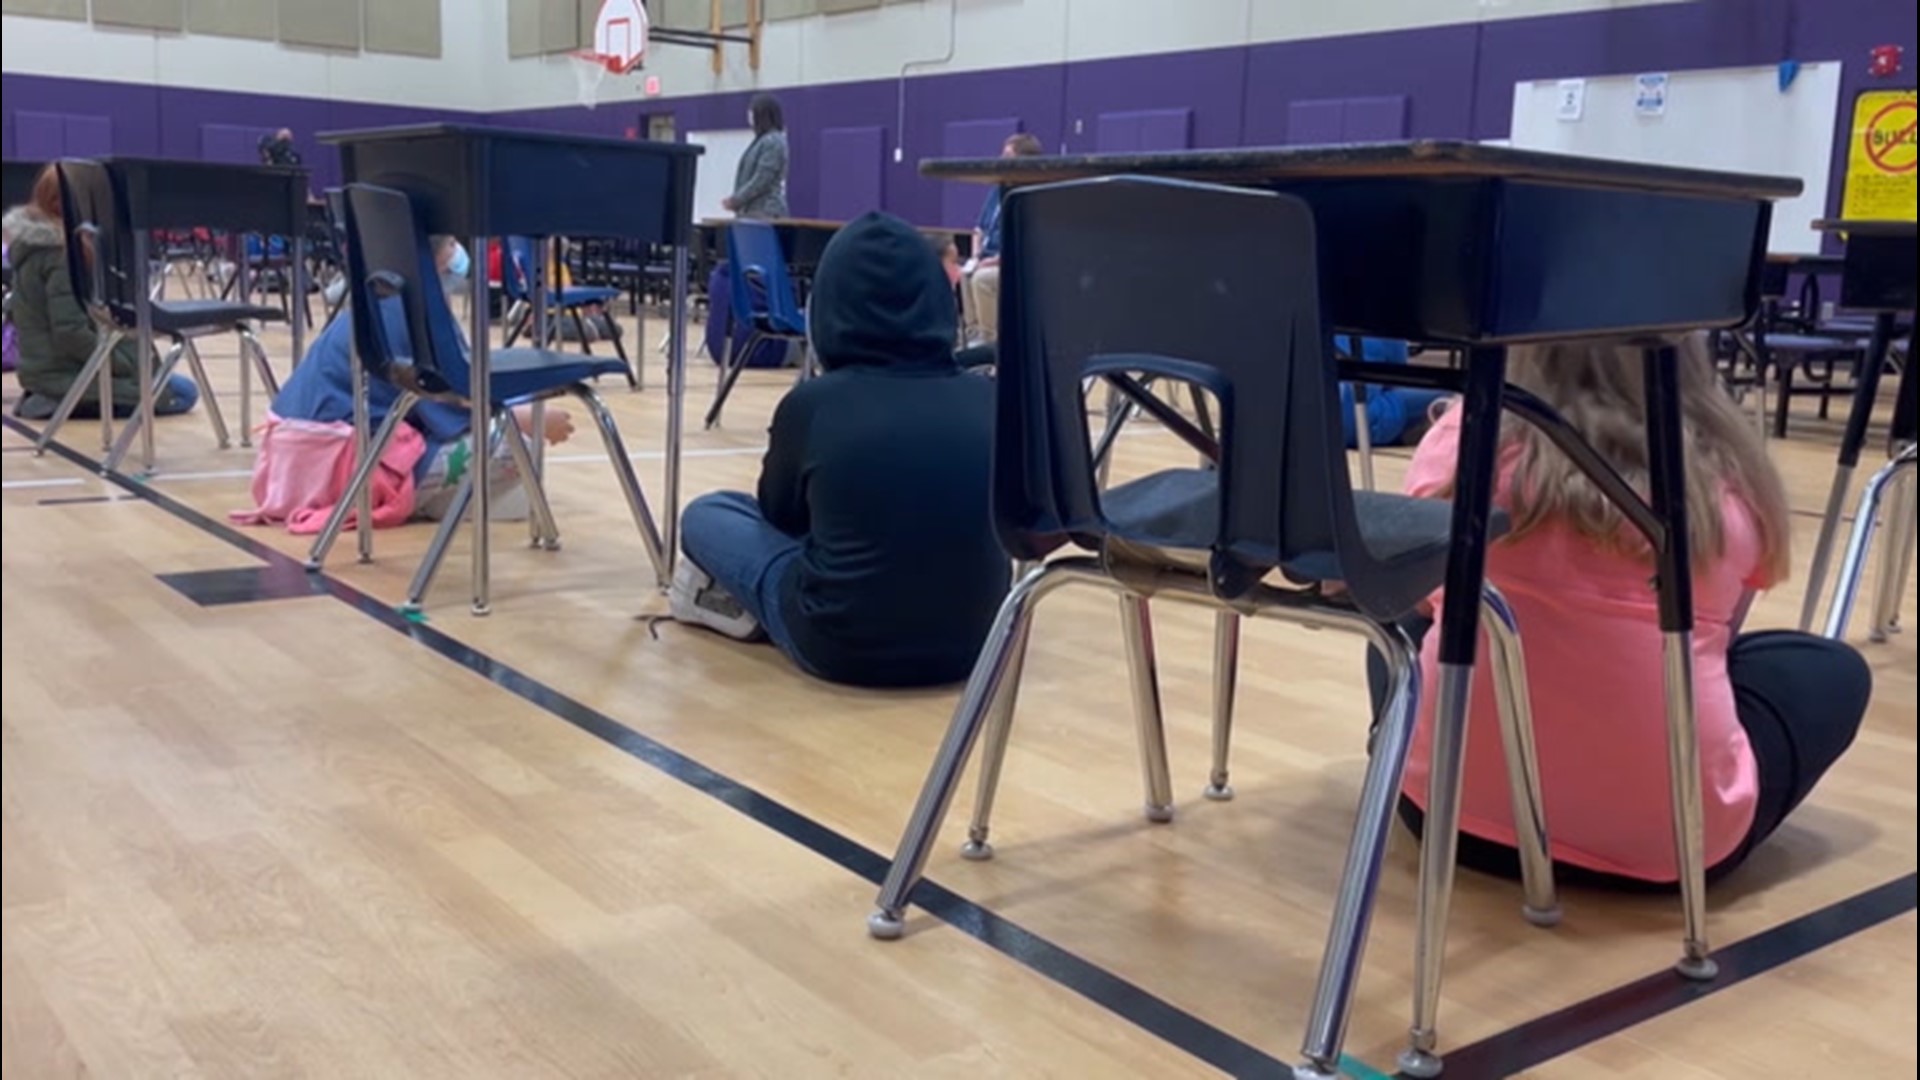 During the spring, many school districts require practicing tornado drills. Social distancing measures present new challenges for schools wanting to prepare for an emergency.